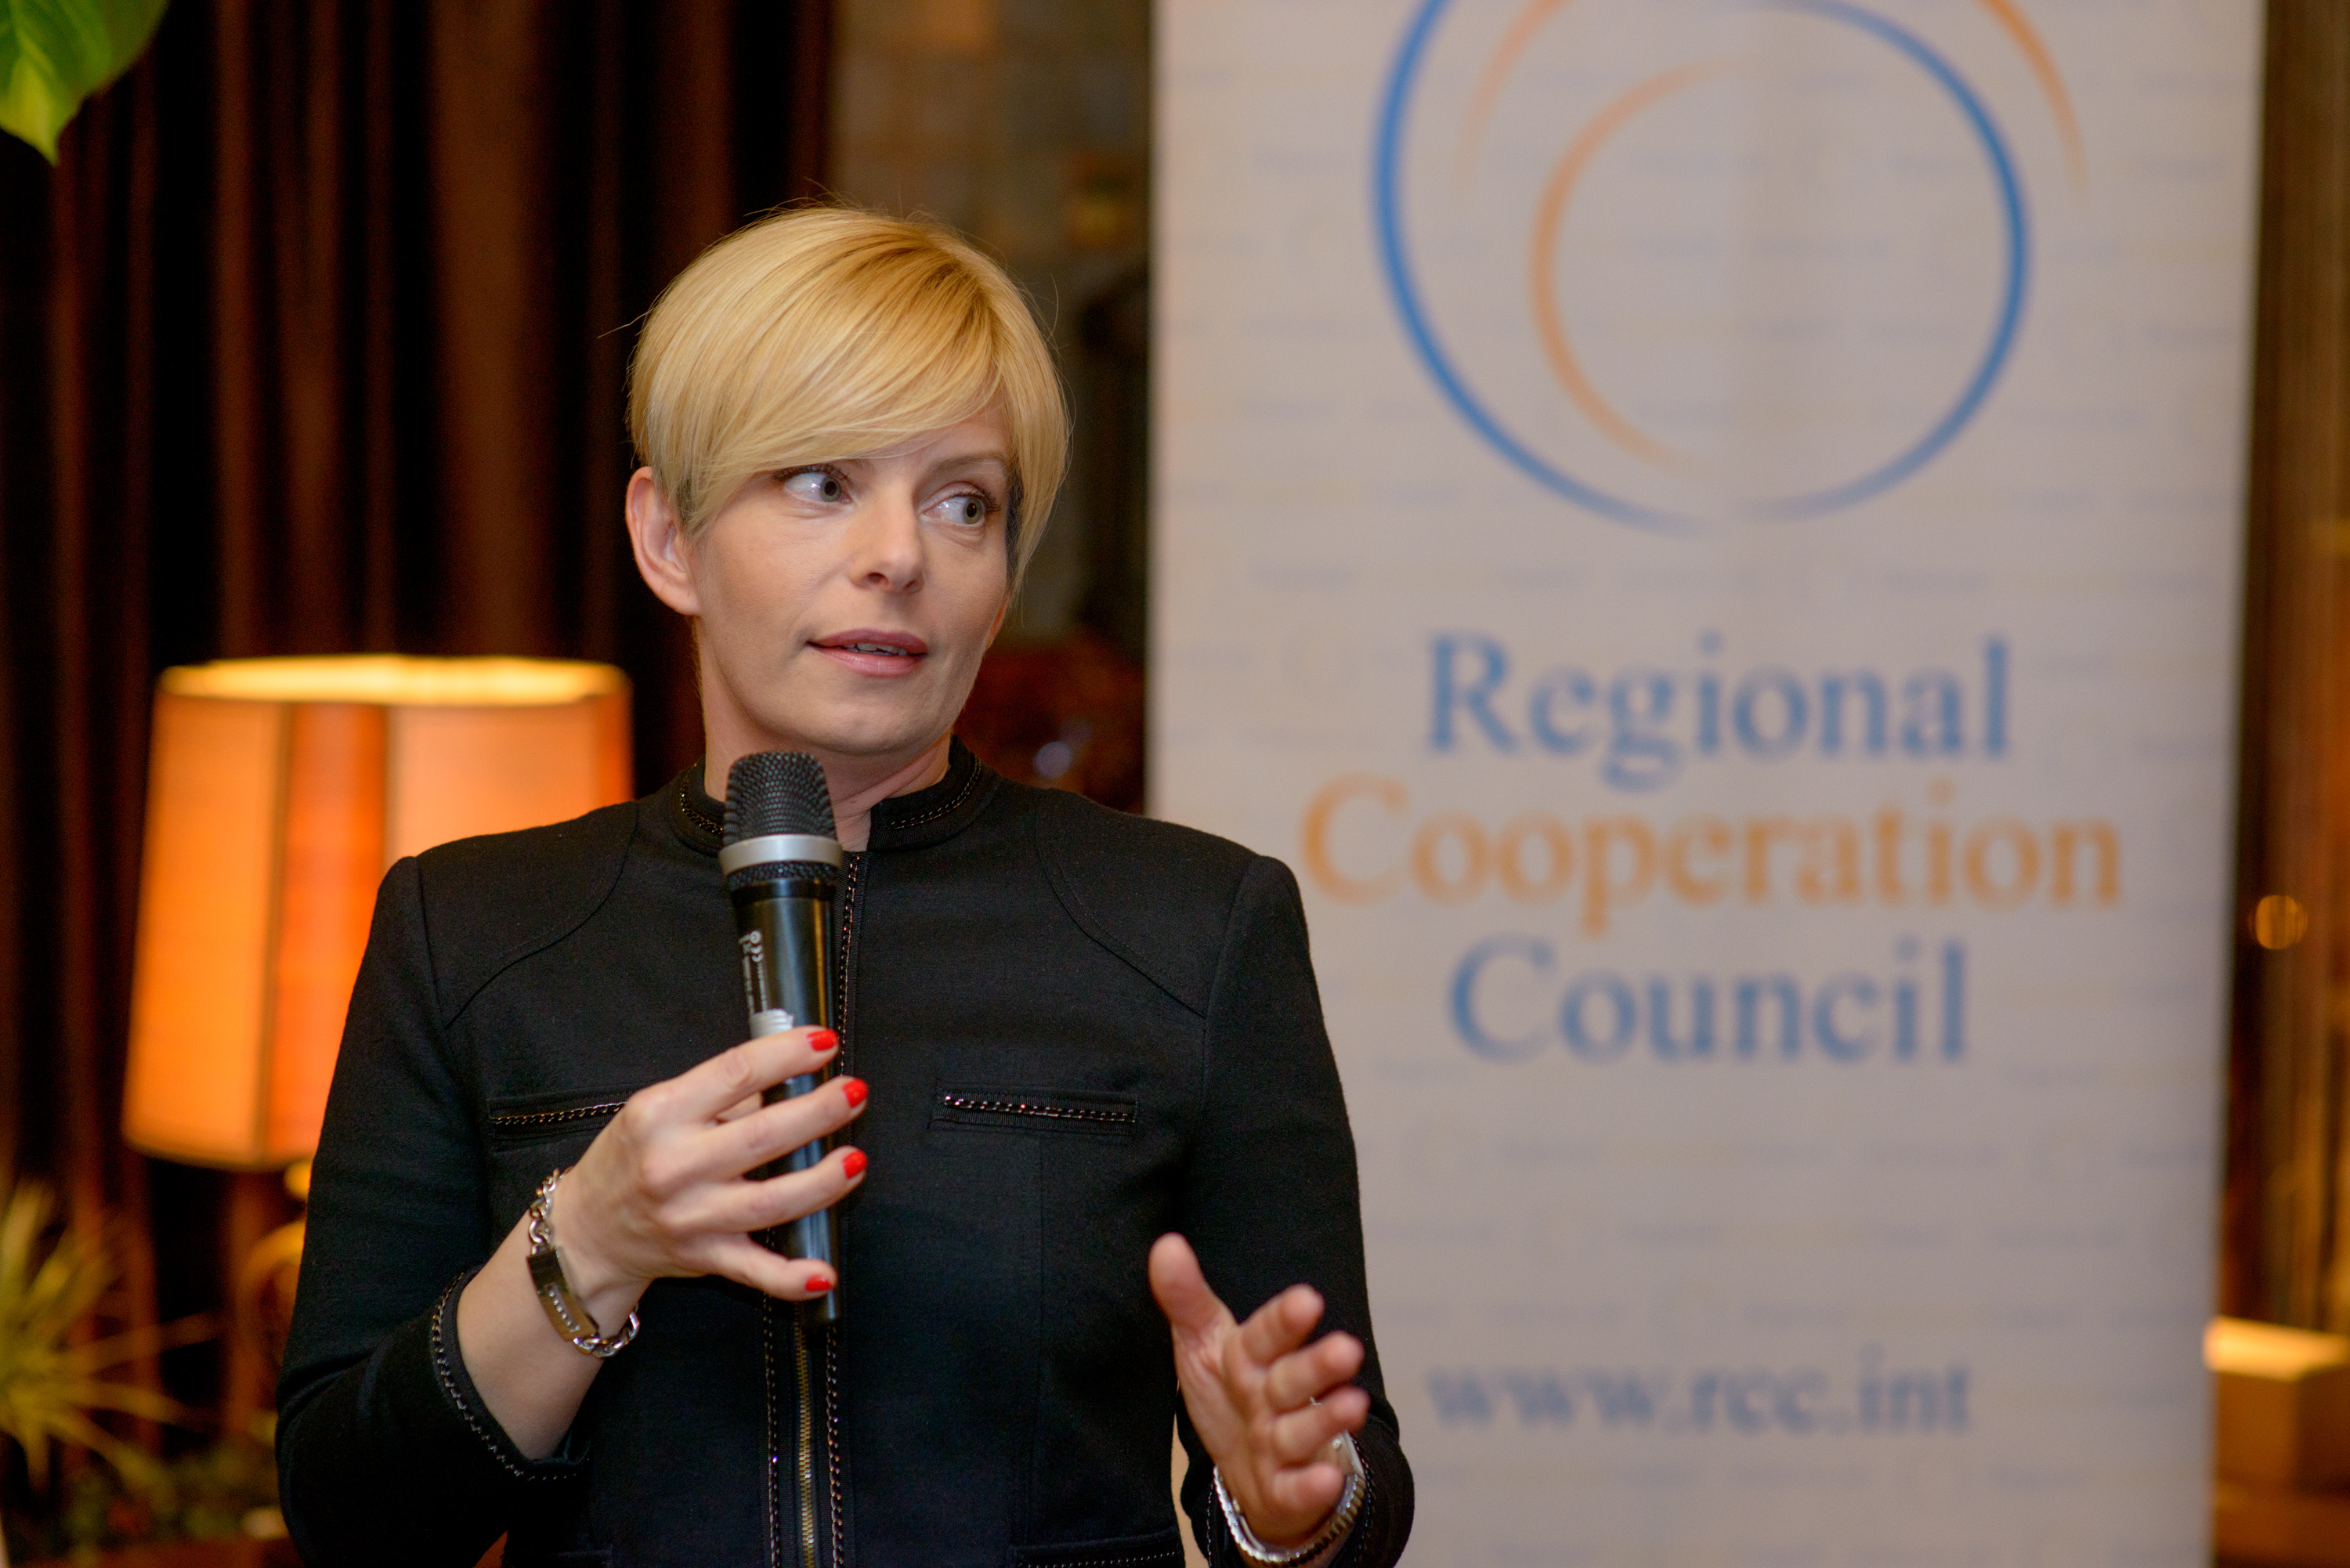 On behalf of the European Fund For the Balkans, Hedvig Morvai, the organization's Executive Director, receives RCC's award Champion of Regional Cooperation for 2015, in Sarajevo on 25 February 2016. (Photo RCC/Amer Kapetanovic)